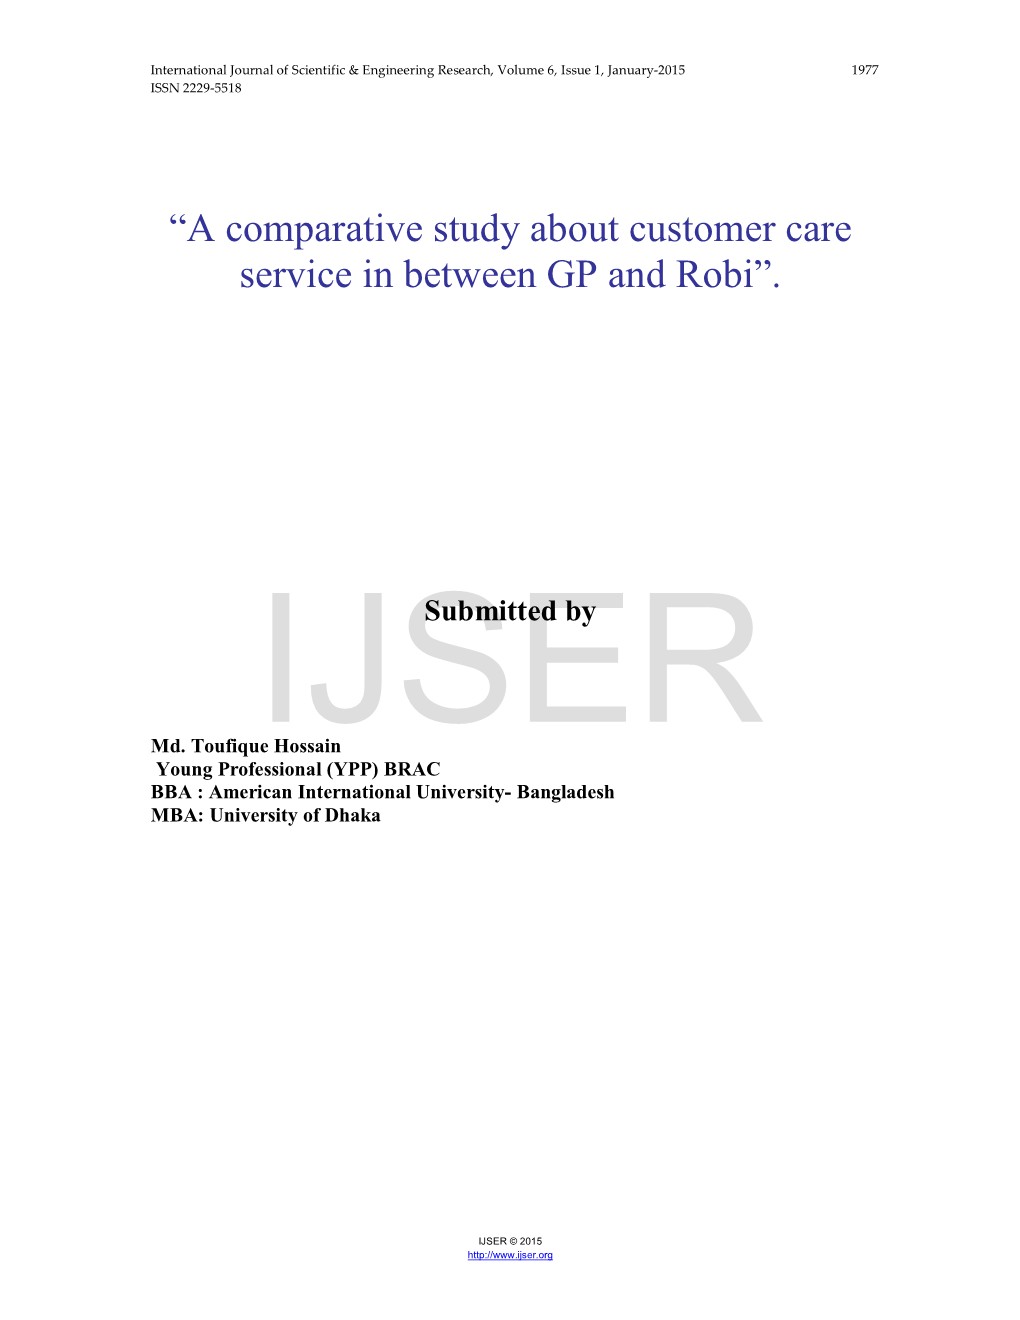 A Comparative Study About Customer Care Service in Between GP and Robi”